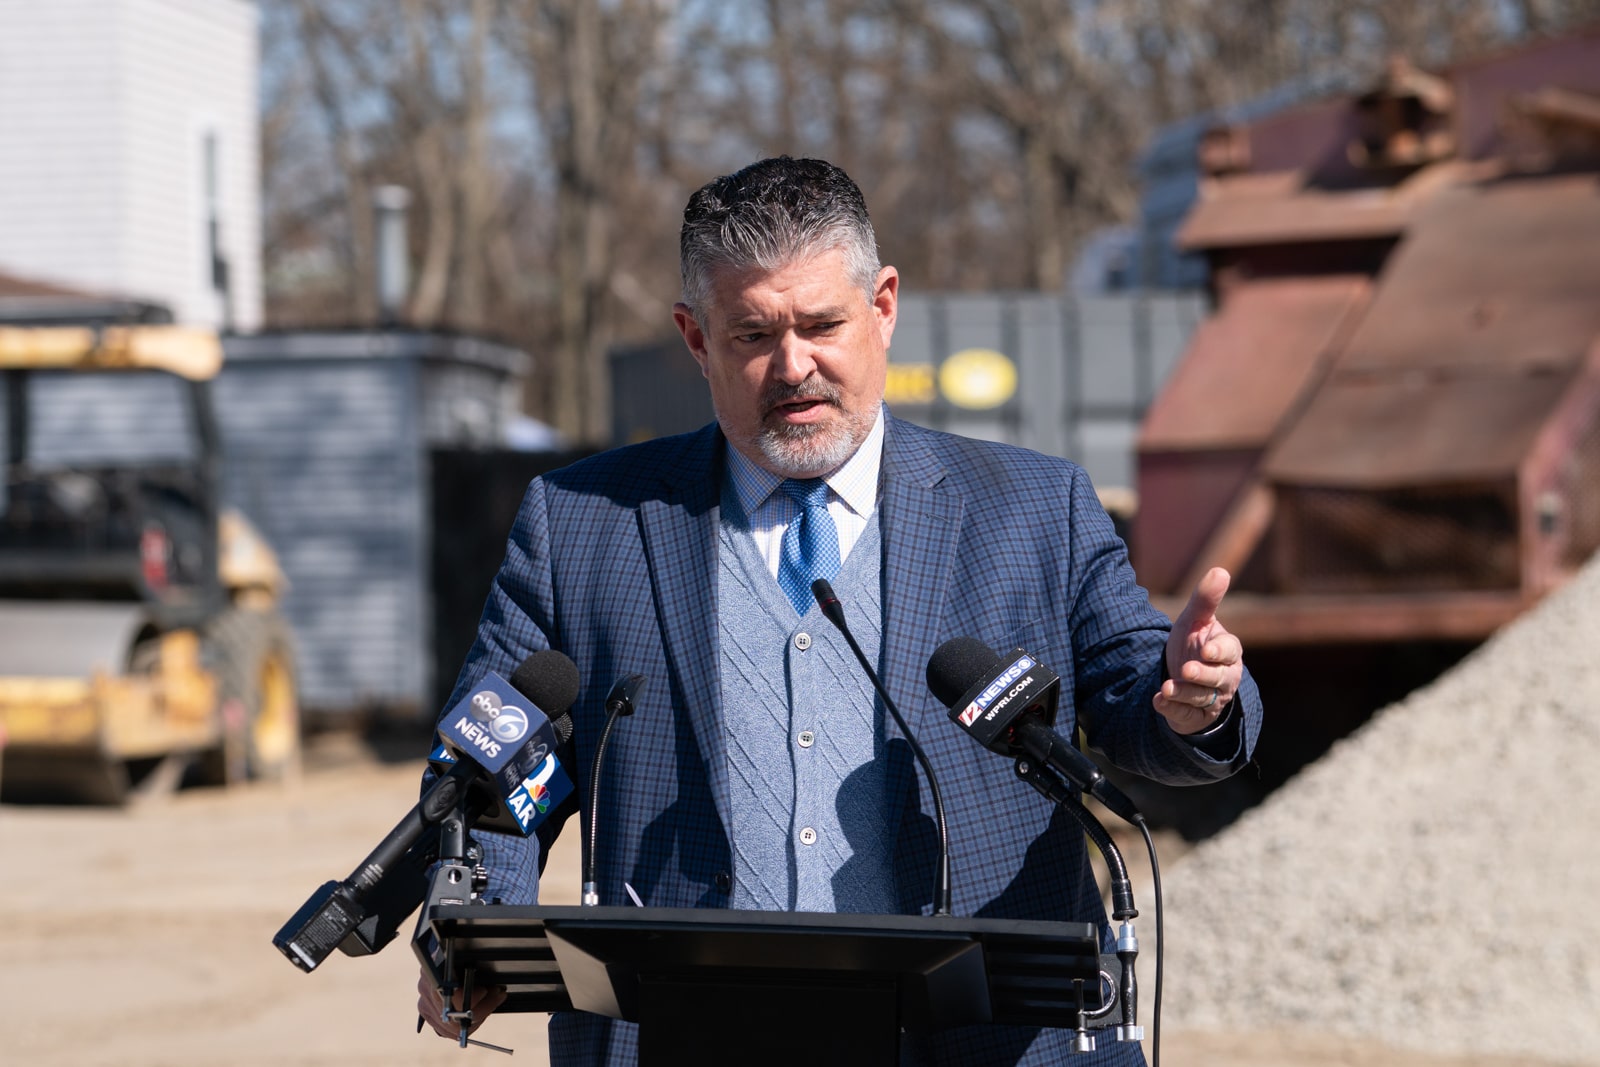 RI Rep. Matthew Dawson speaks at the groundbreaking event for the Residences at Riverside Square in East Providence on Monday, April 10, 2023. Photo by Stephen Ide/ONE Neighborhood Builders